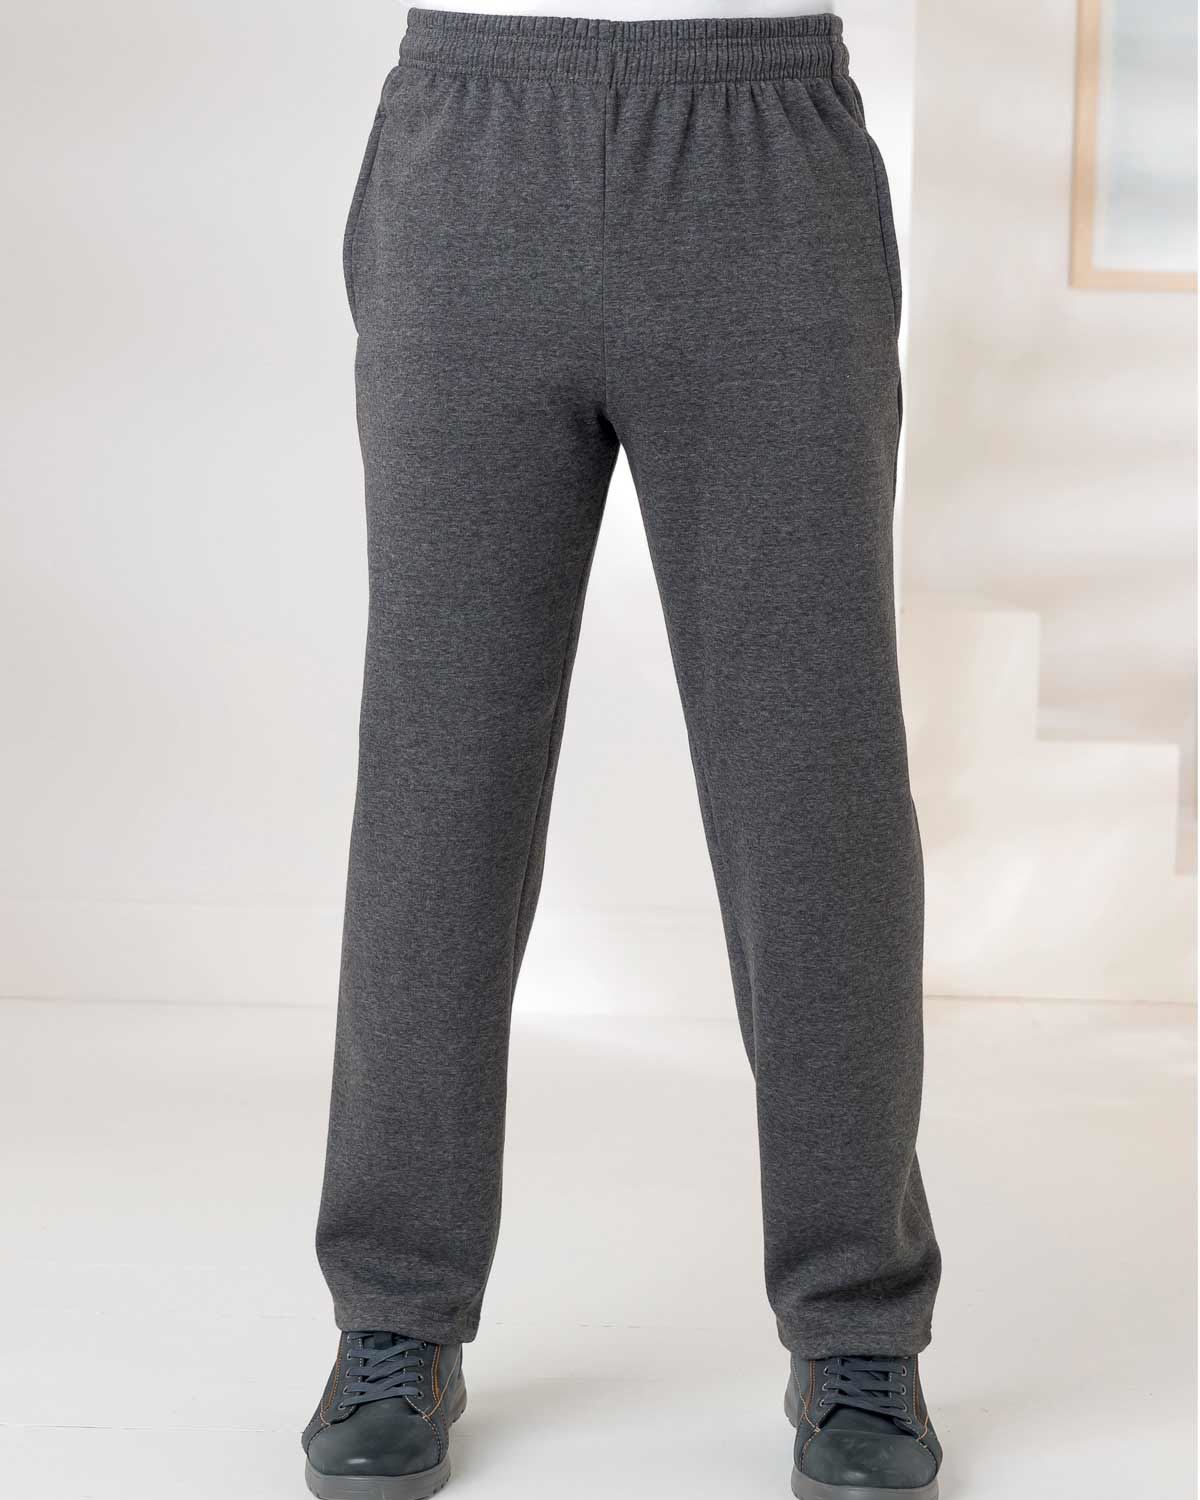 Mens Leisure Trouser, Straight legs and hems for a smarter look.